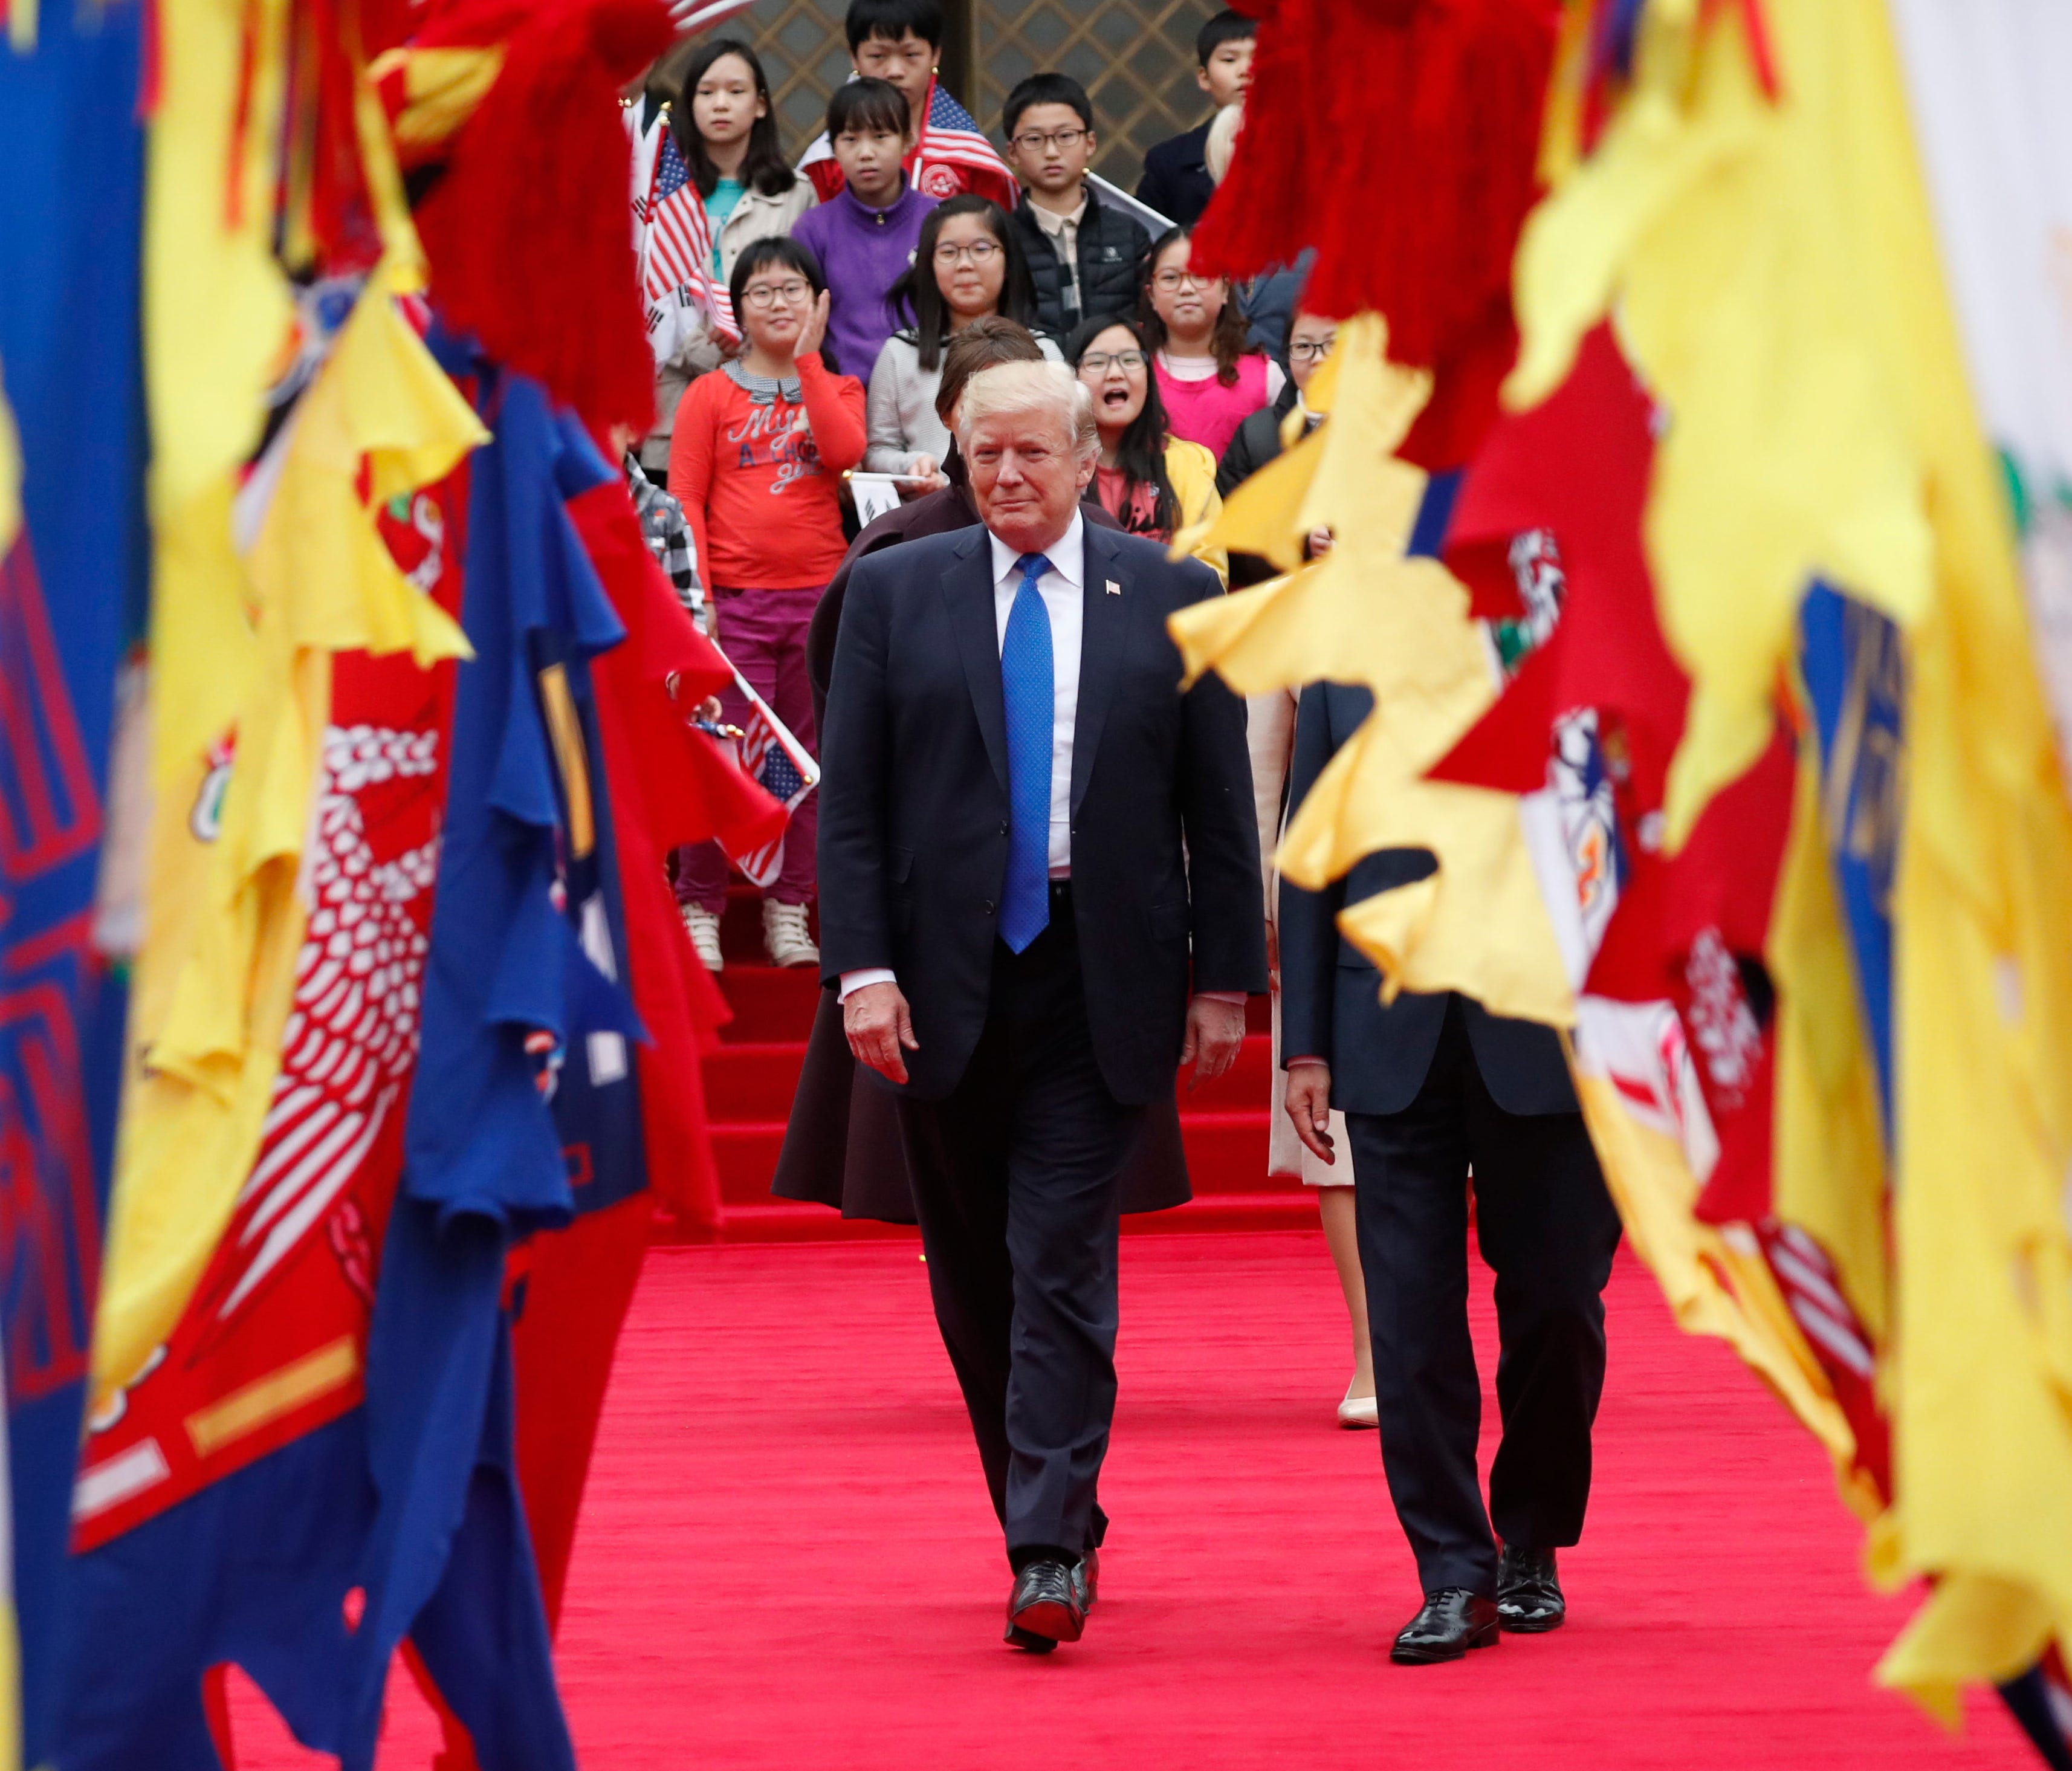 President Trump walks with South Korea's President Moon Jae-in during a welcoming ceremony at the Presidential Blue House in Seoul.